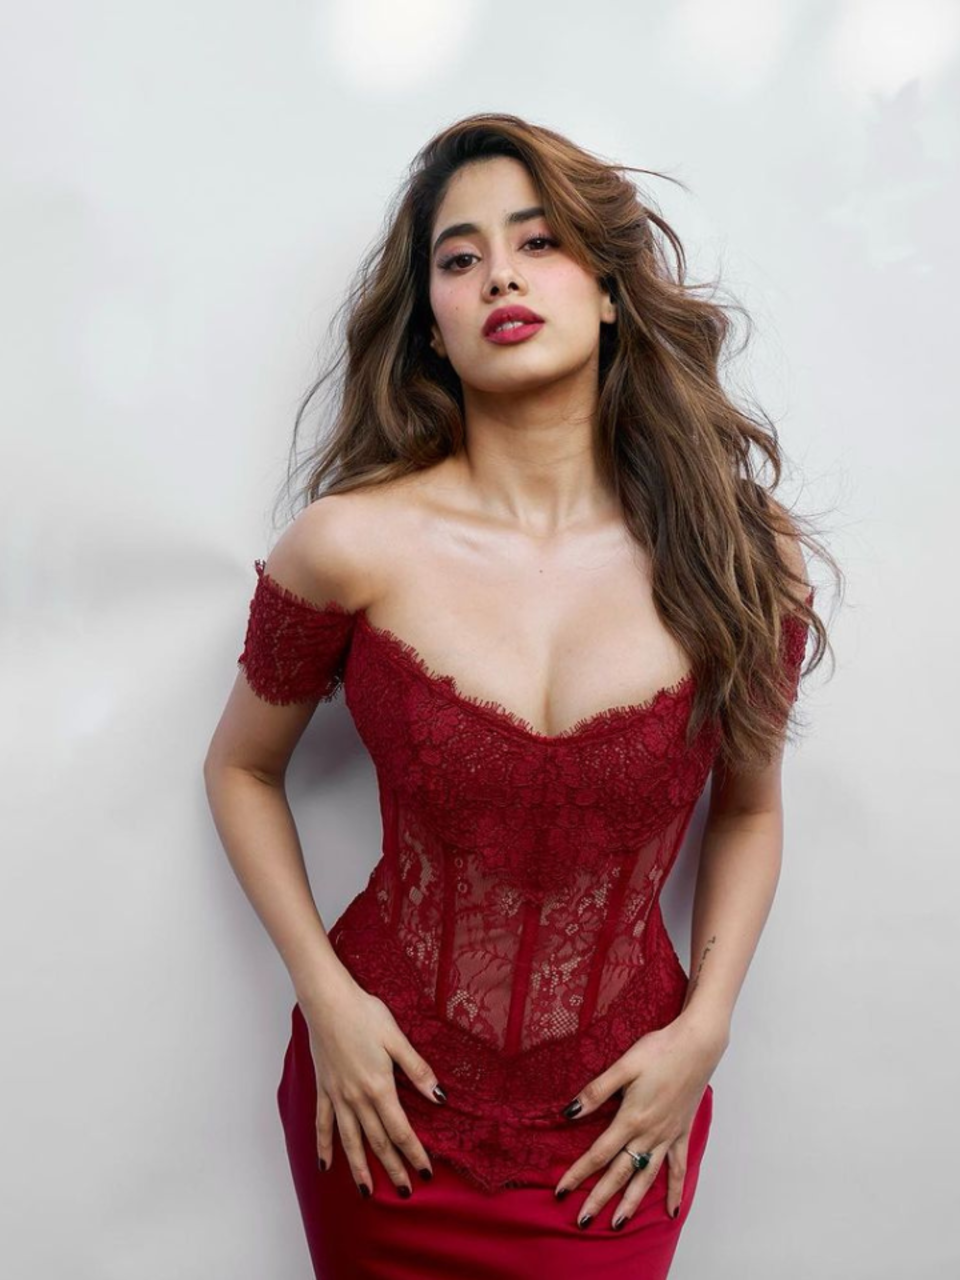 Janhvi Kapoor All Red Look in Lace and Satin Corset Gown is Inspiration for Valentine's Look